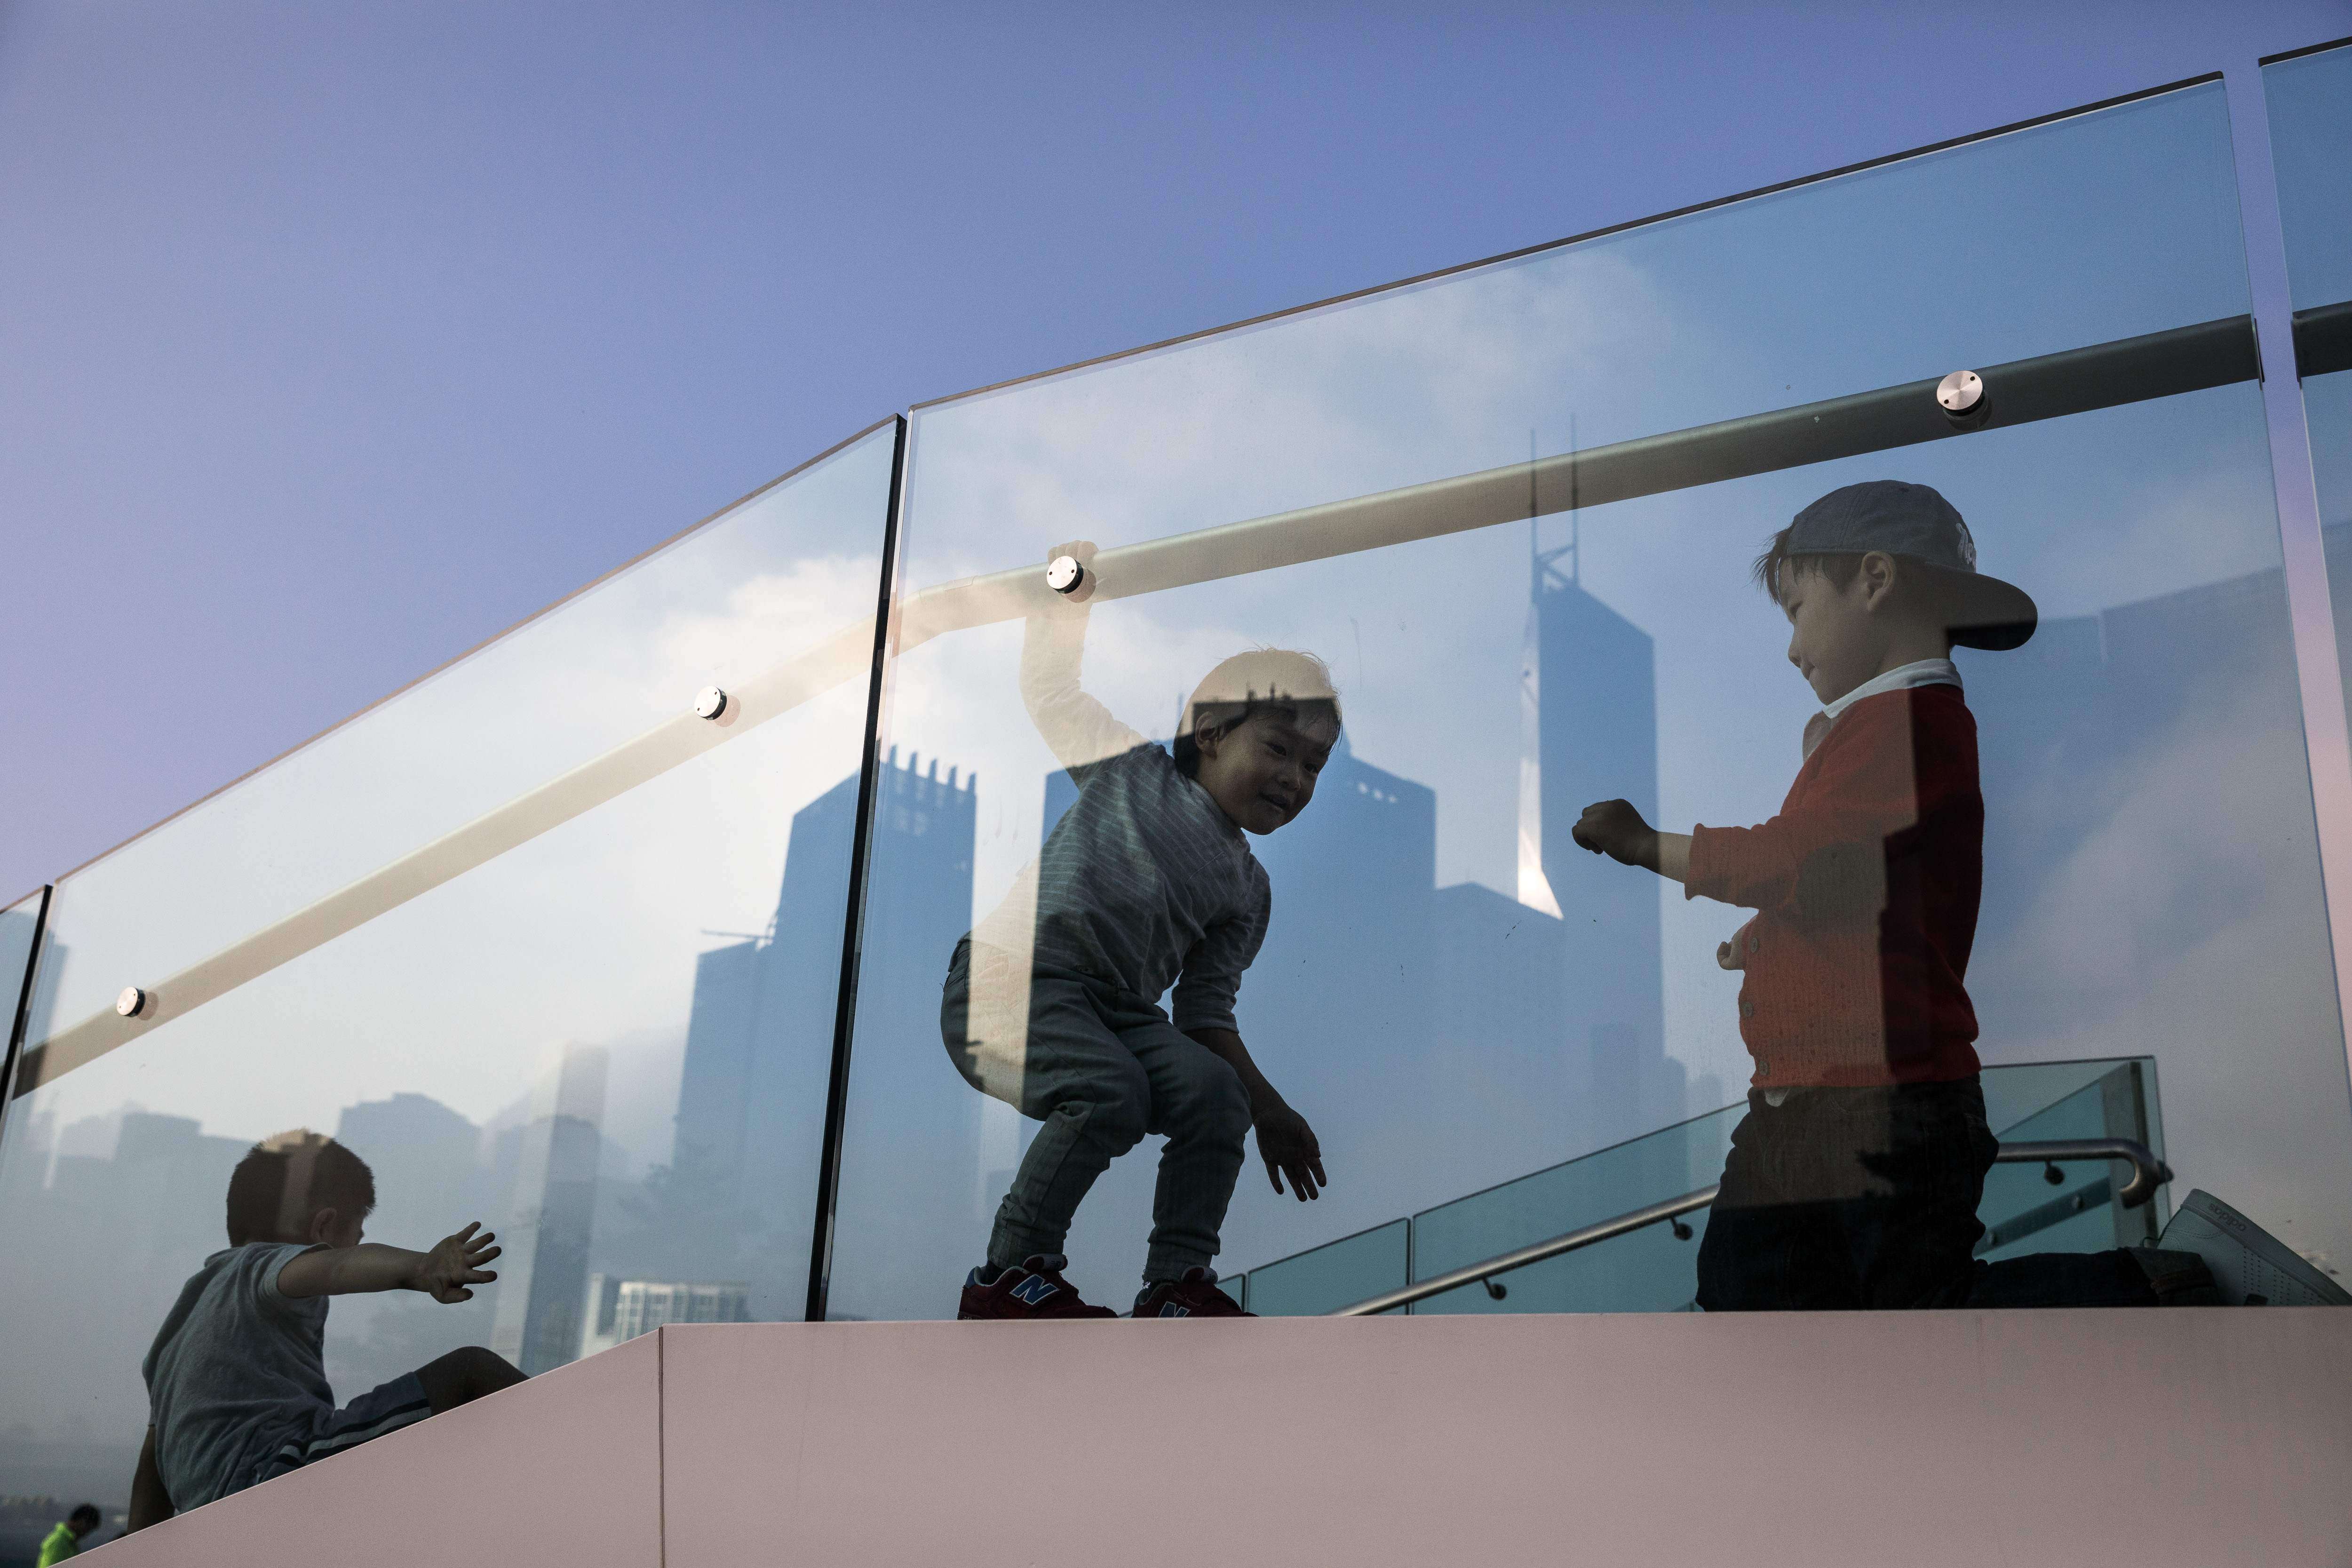 Children play on a viewing platform in Hong Kong as the city’s skyline is reflected in the glass panels. Hong Kong has long been a centre for processing questionable money flows. As a major financial player, it is under pressure to be truly compliant with global governance norms. Photo: AFP